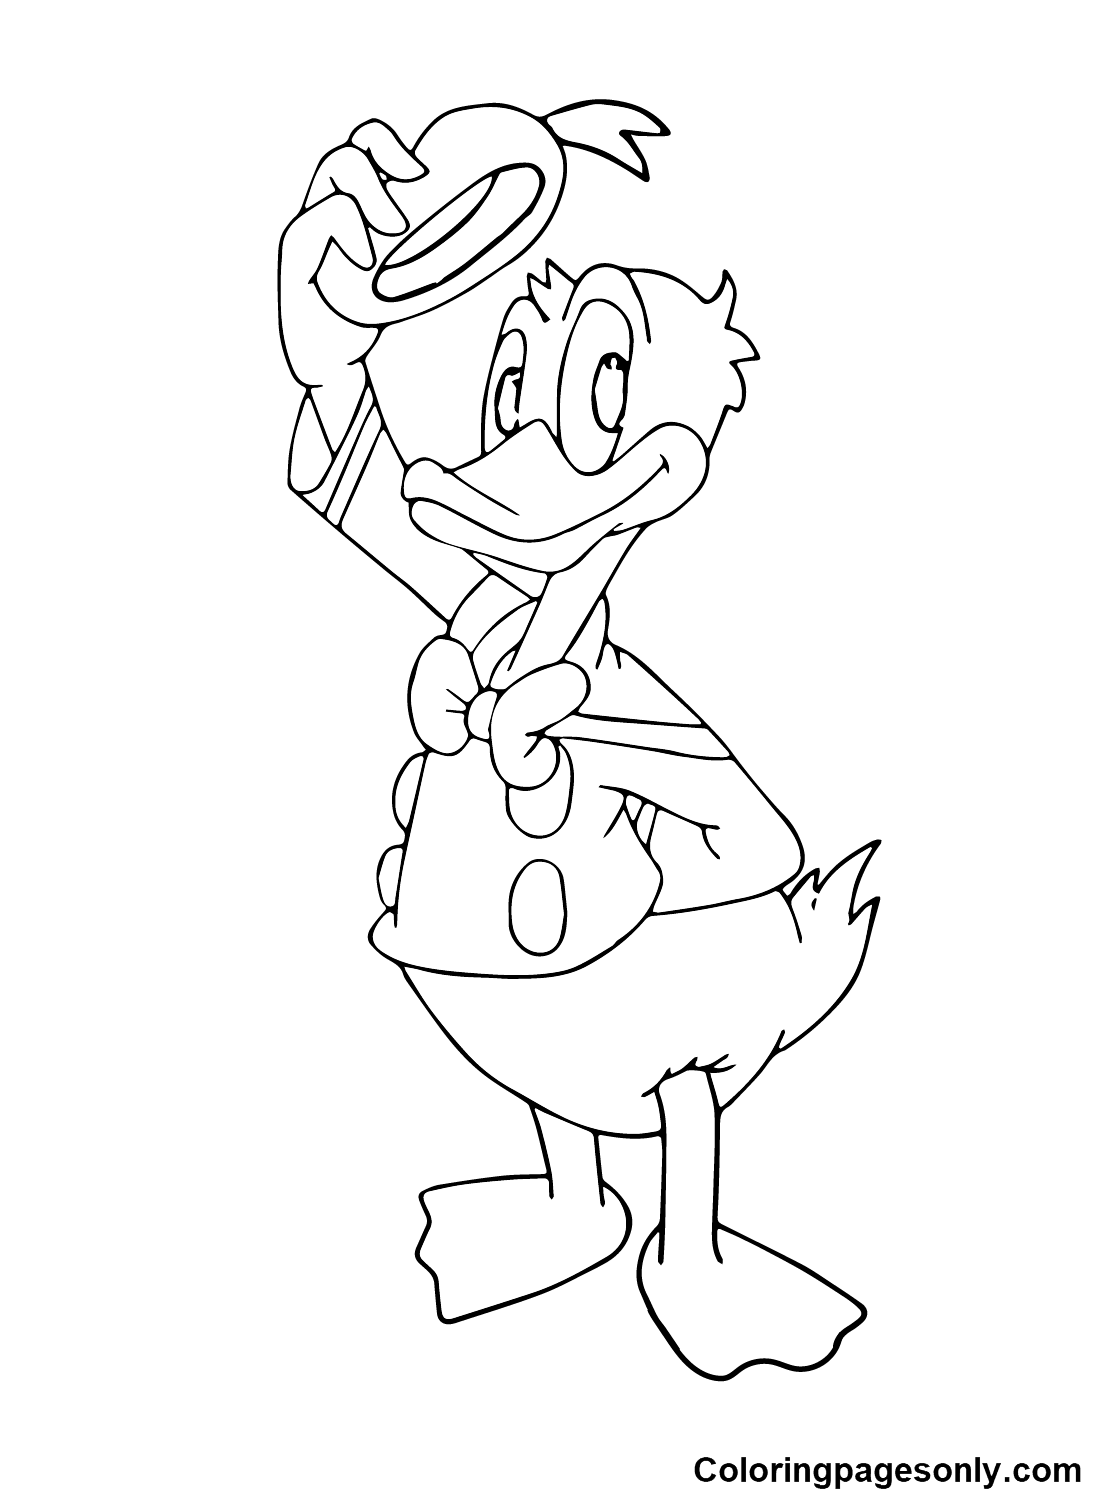 Donald Duck from Kingdom Hearts Coloring Page